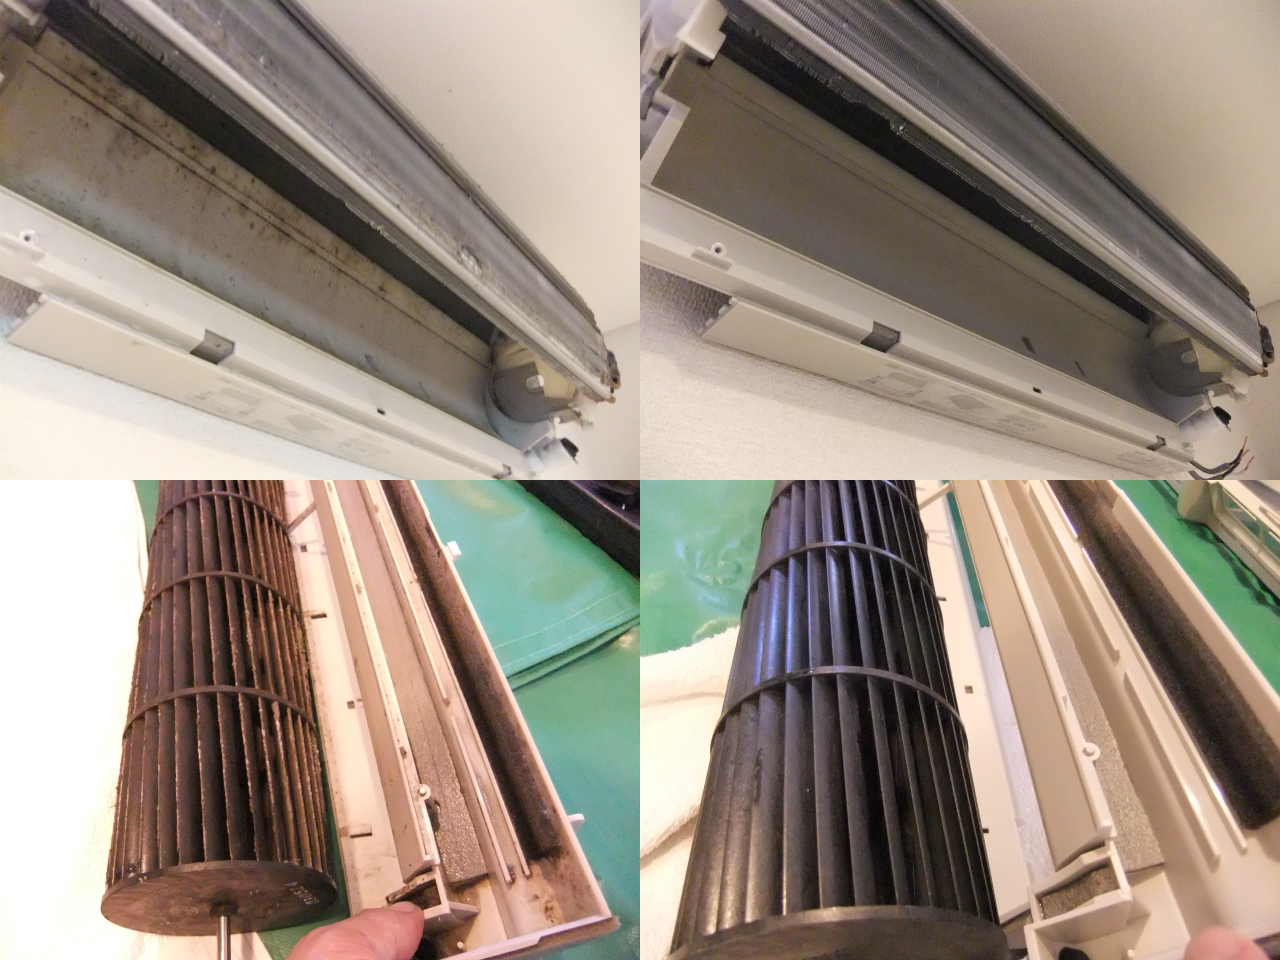 http://ajras.net/images/120816-aircon2.jpg